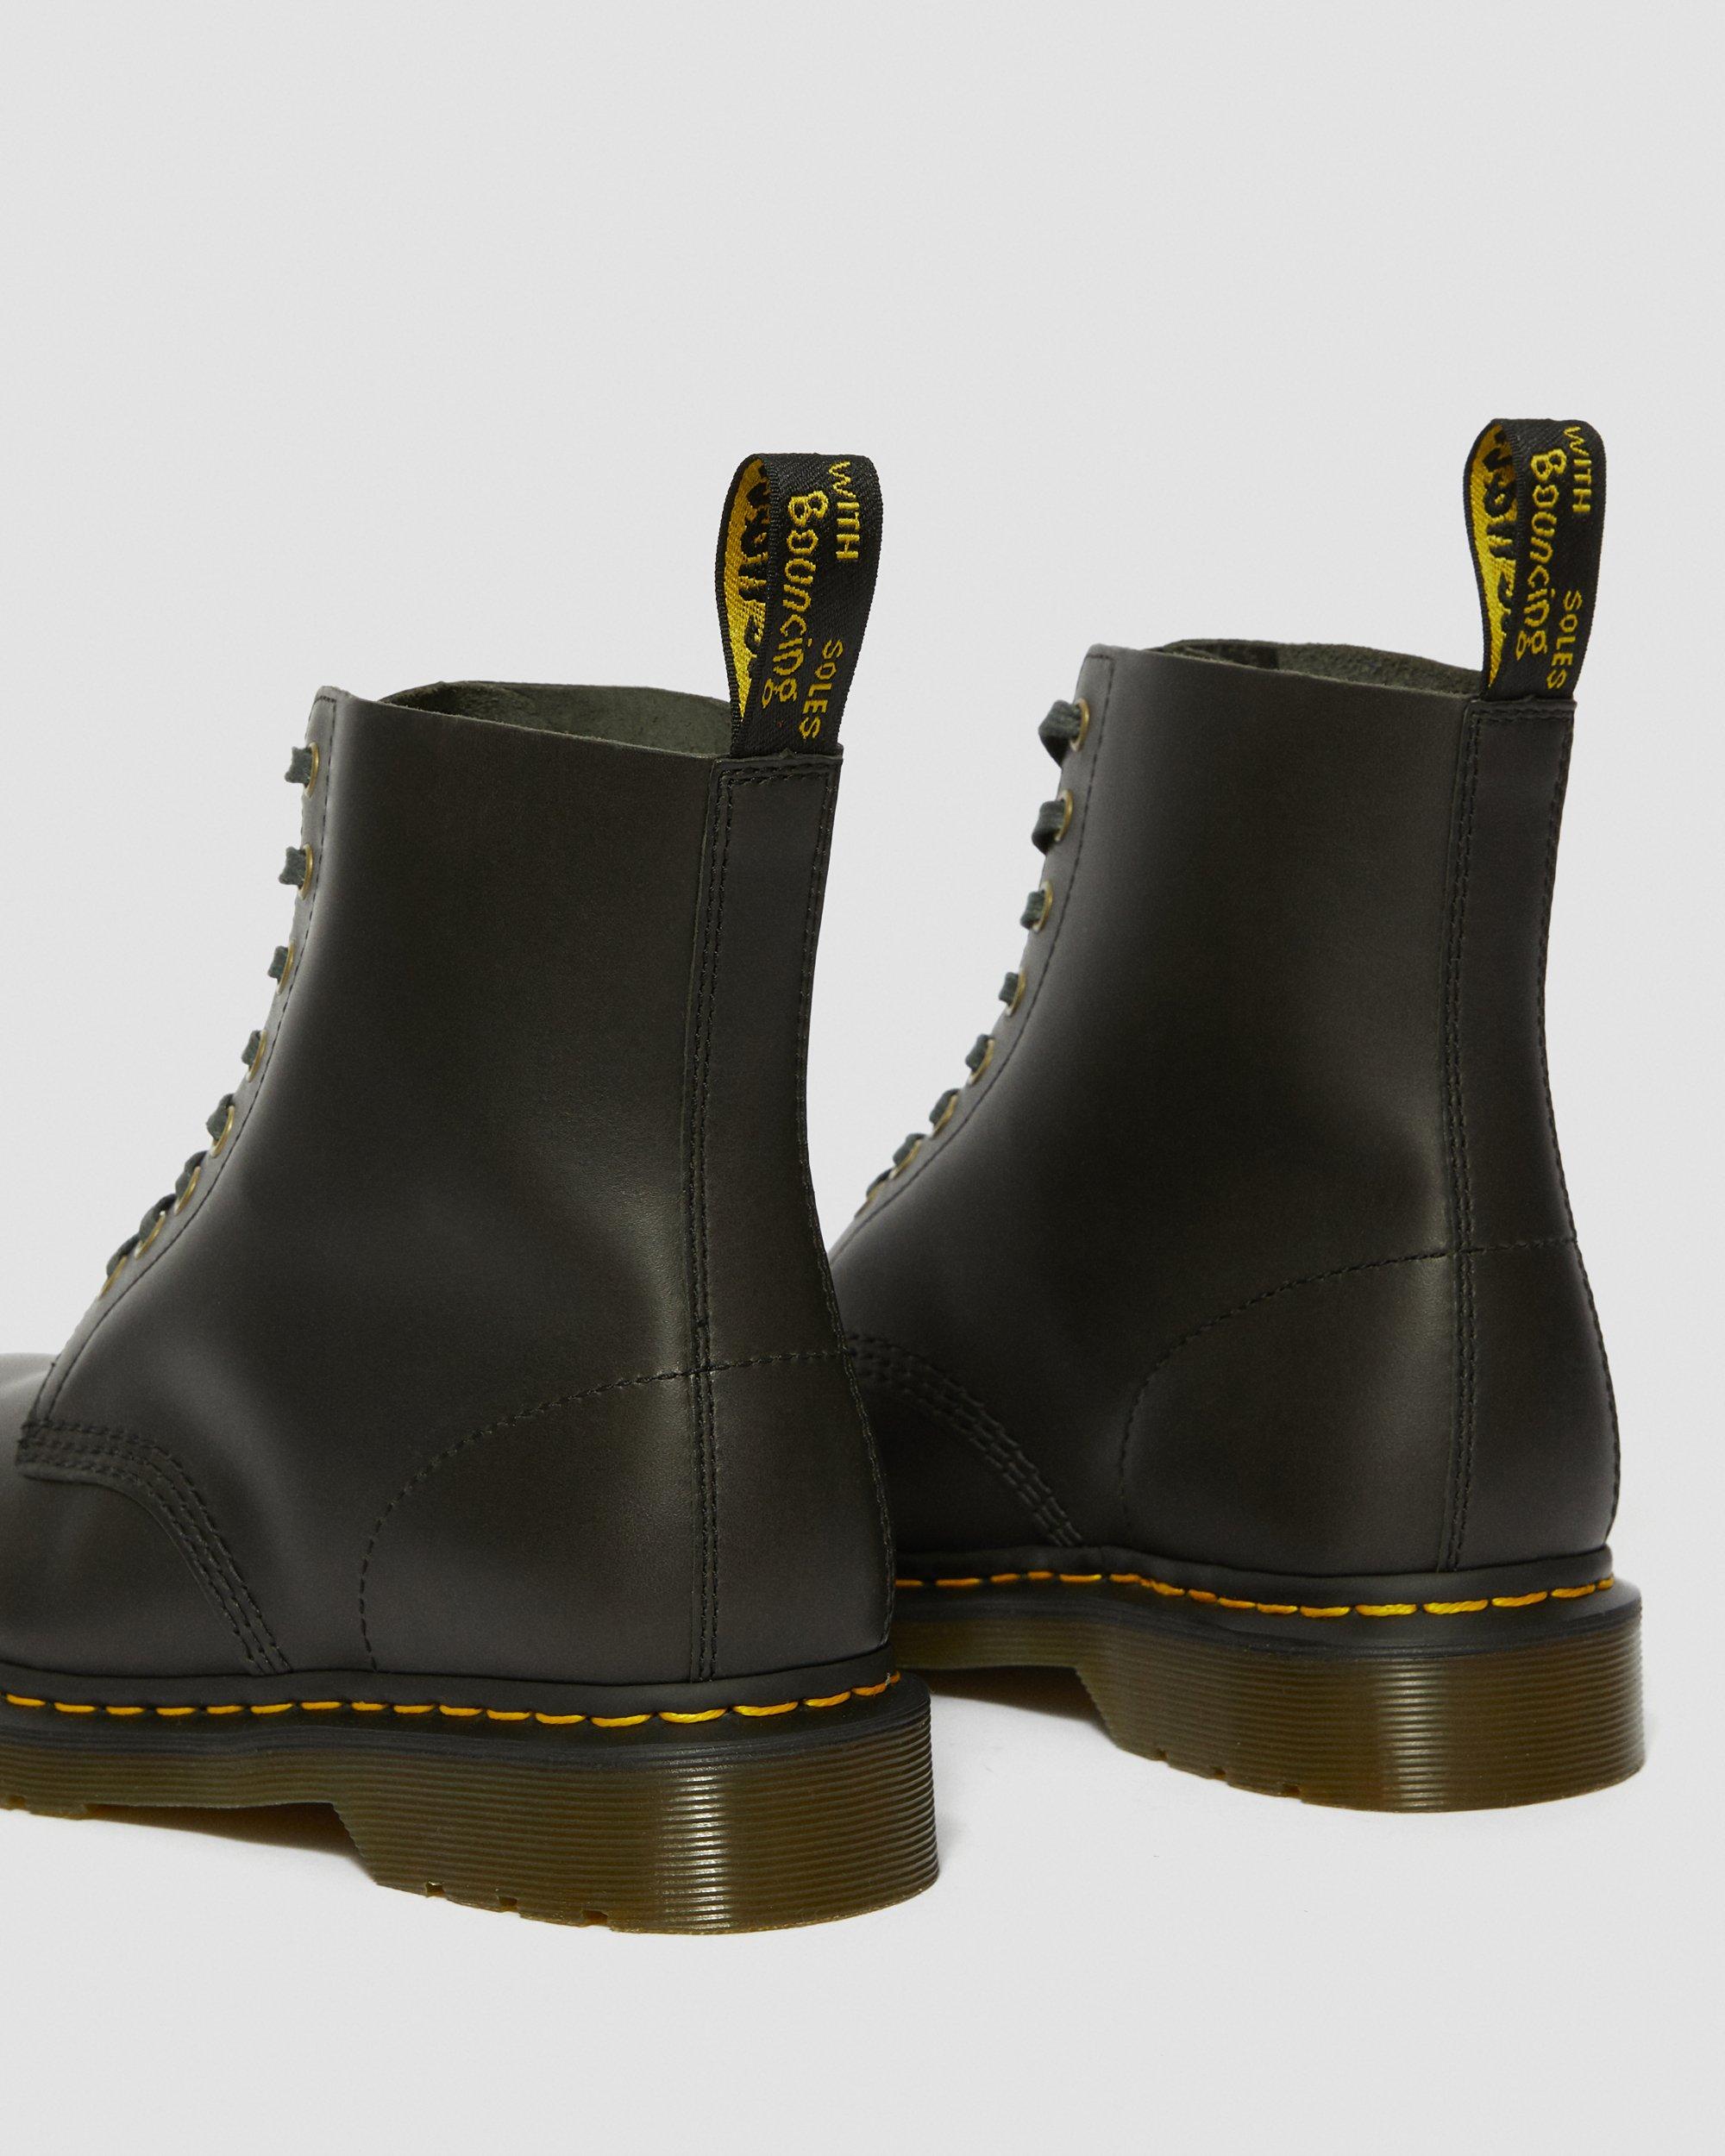 aanraken steen beloning 1460 Pascal Classico Leather Lace Up Boots | Dr. Martens